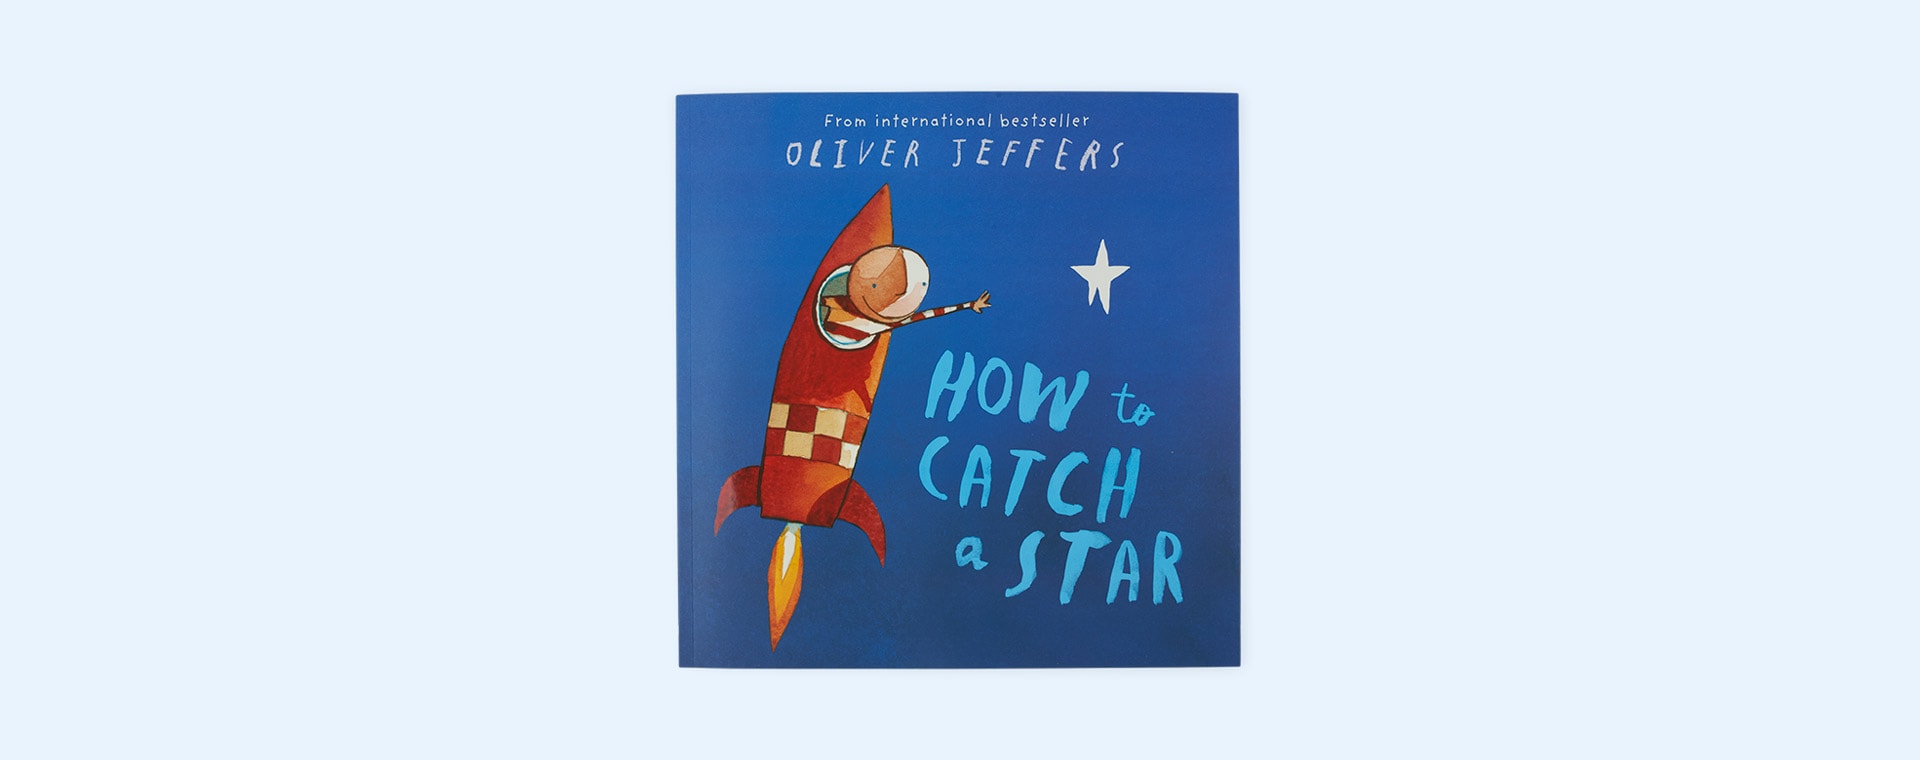 How to catch a star bookspeed How To Catch A Star